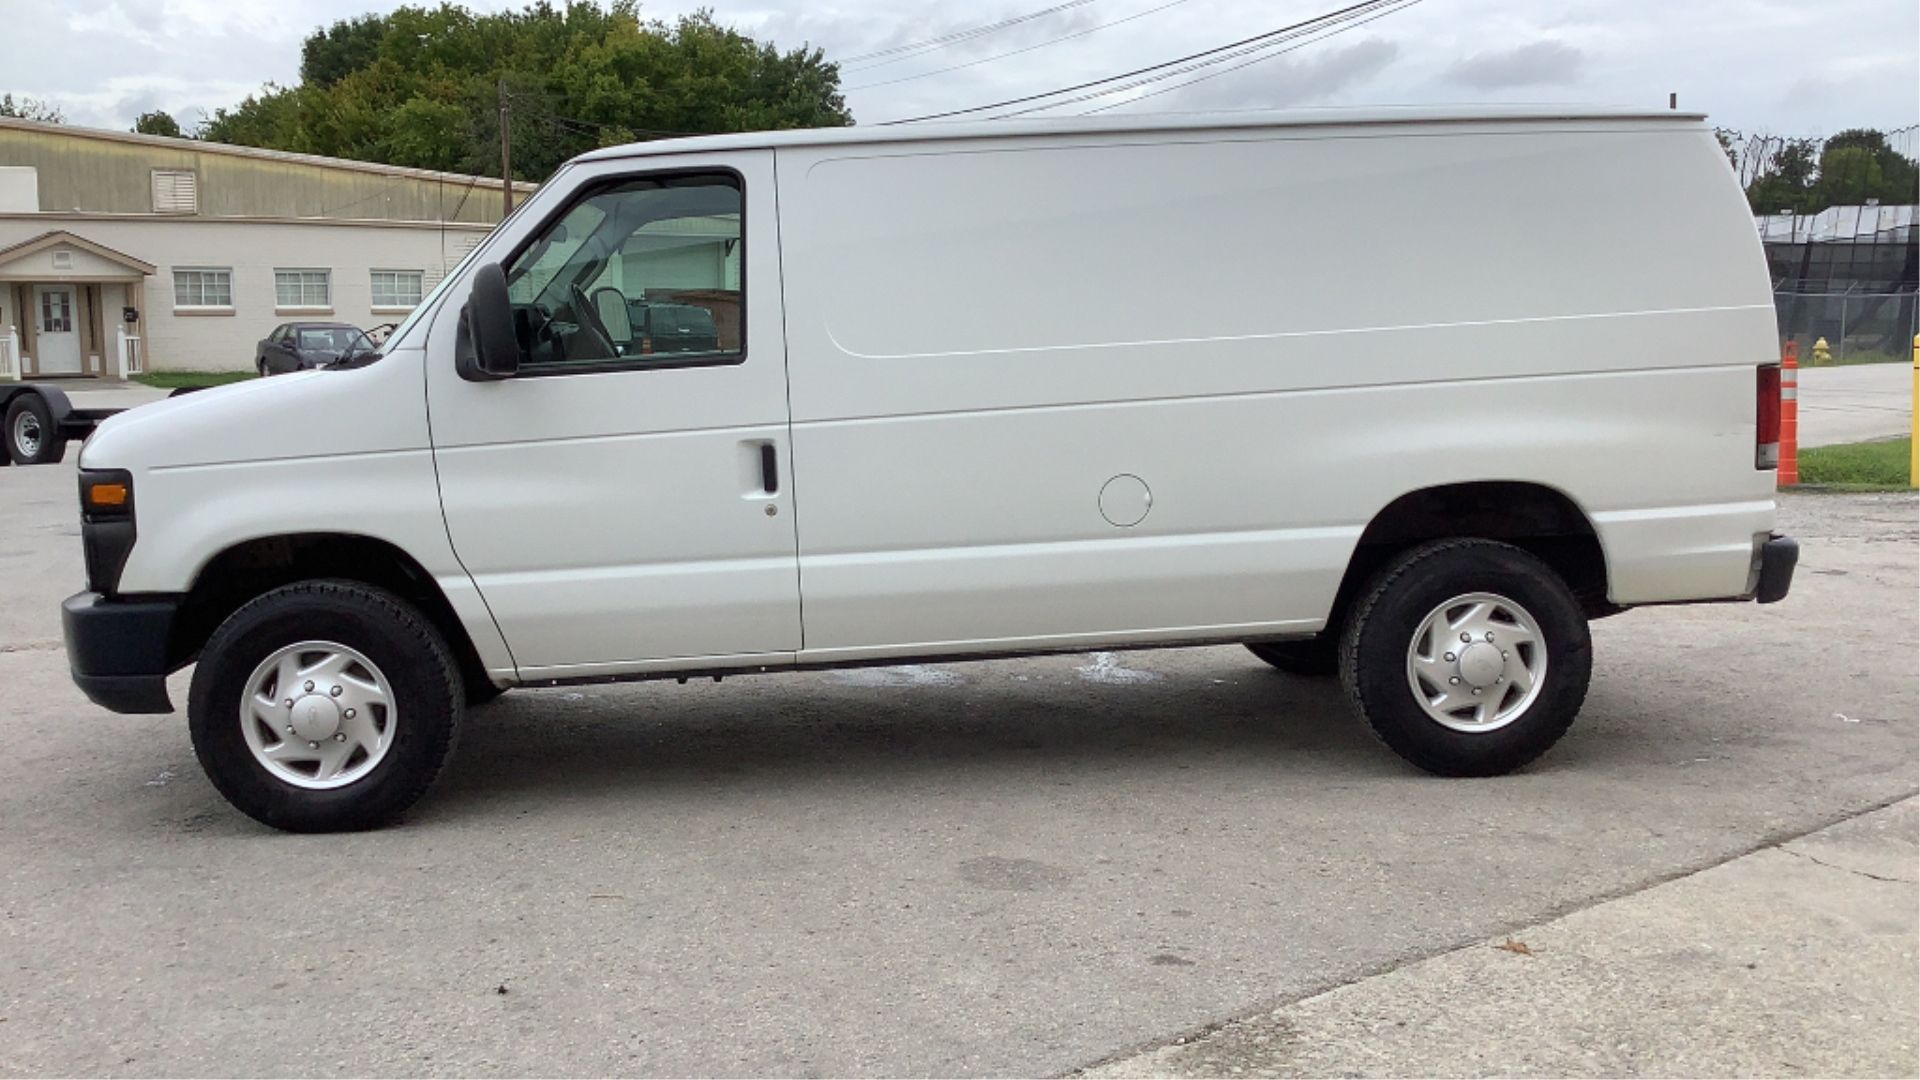 2009 Ford E-350 Cargo Van 2WD Super Duty - Image 9 of 74